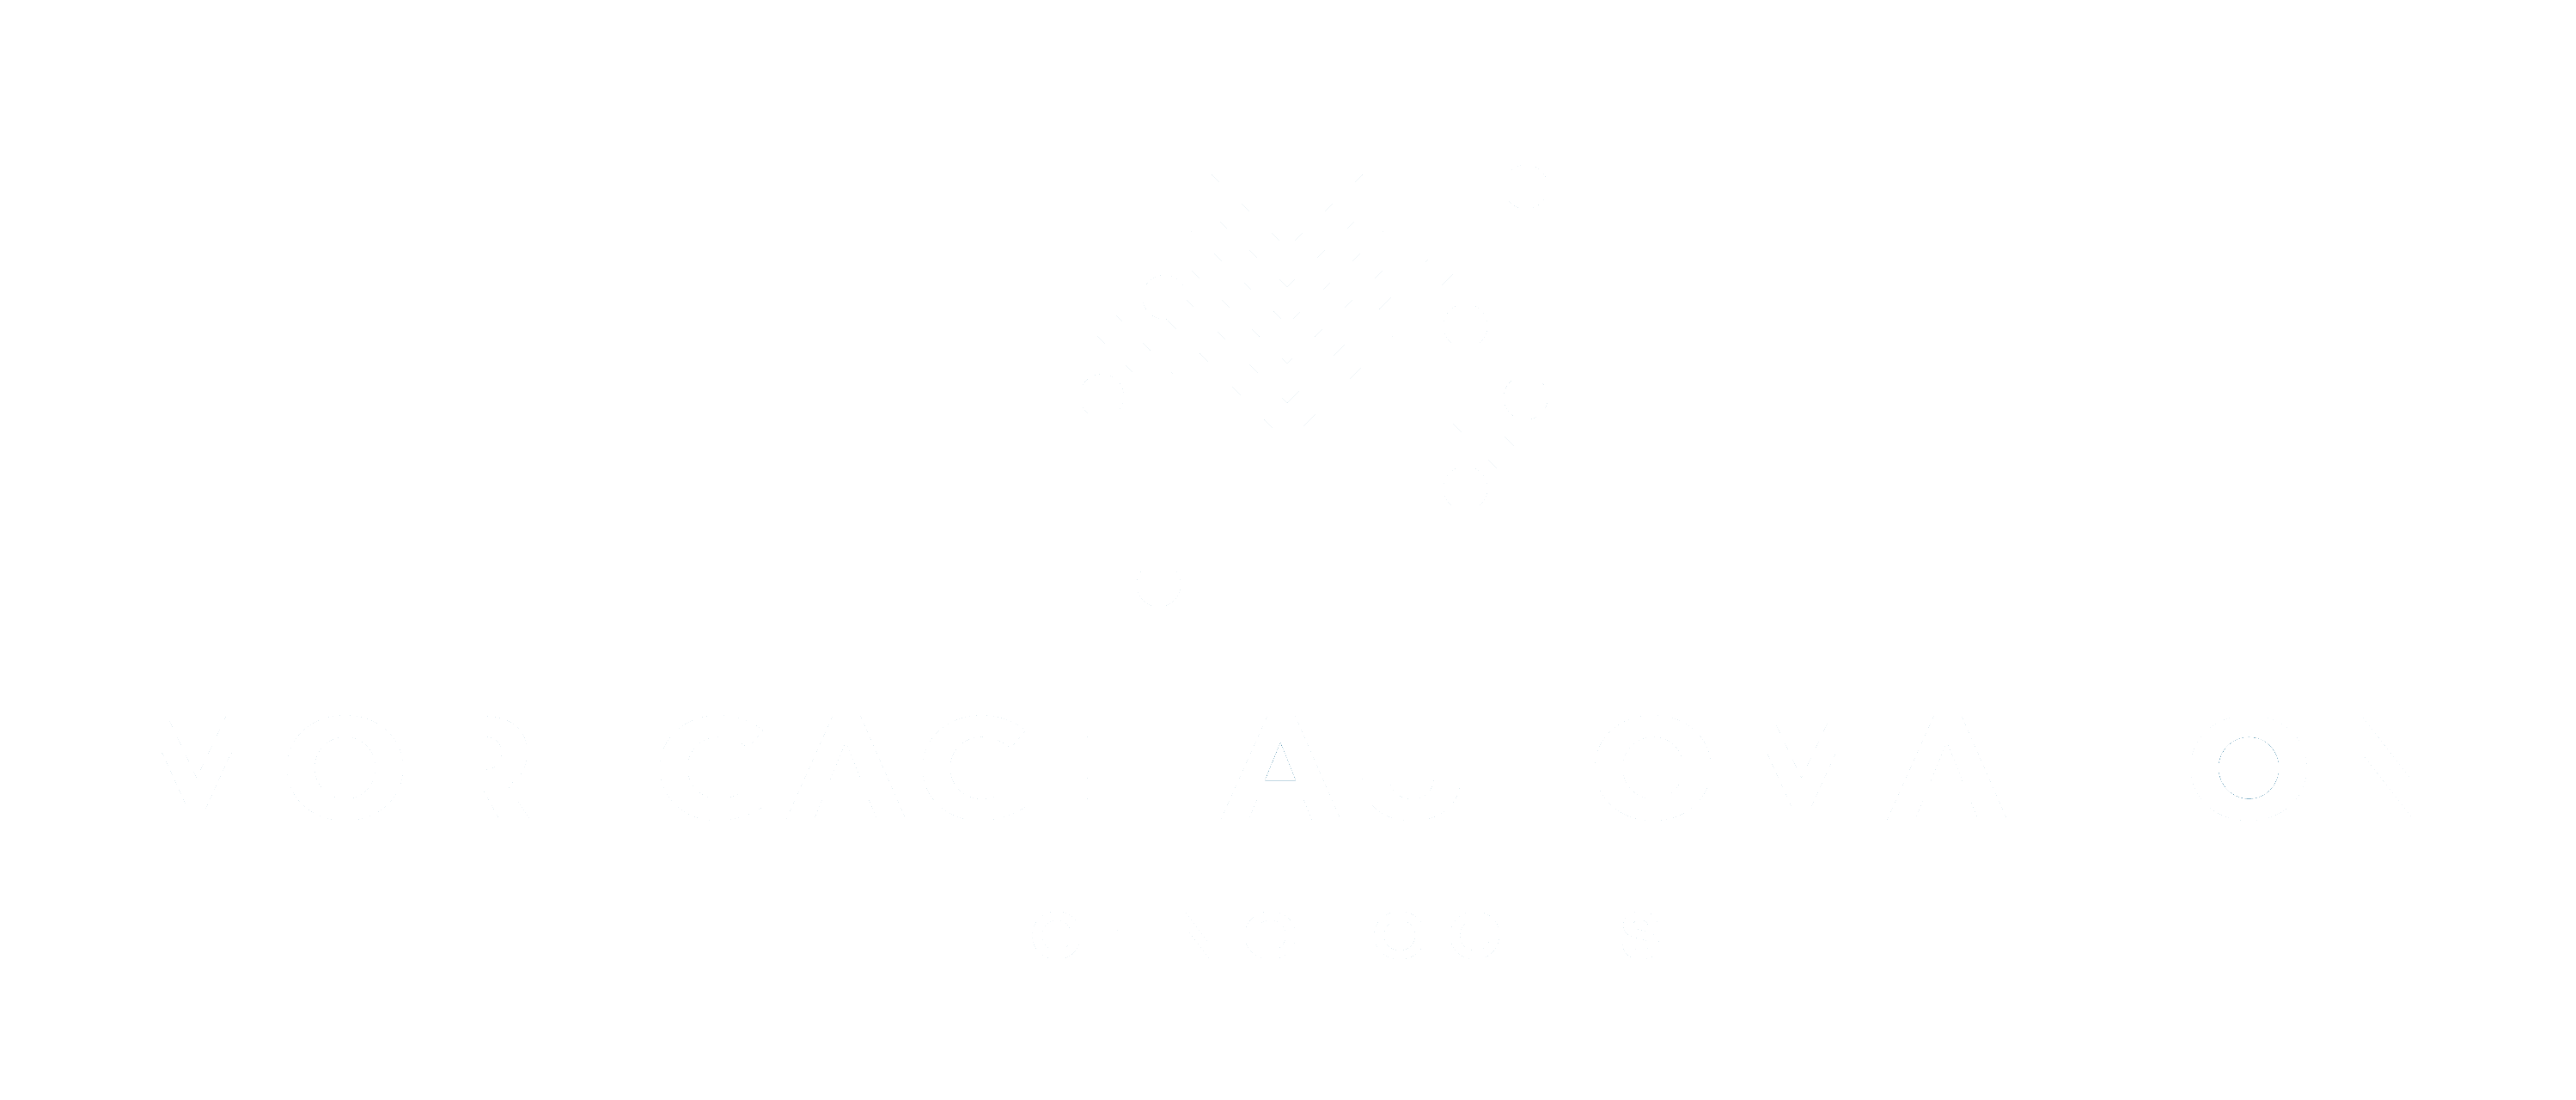 Mortgage Automation Technologies 